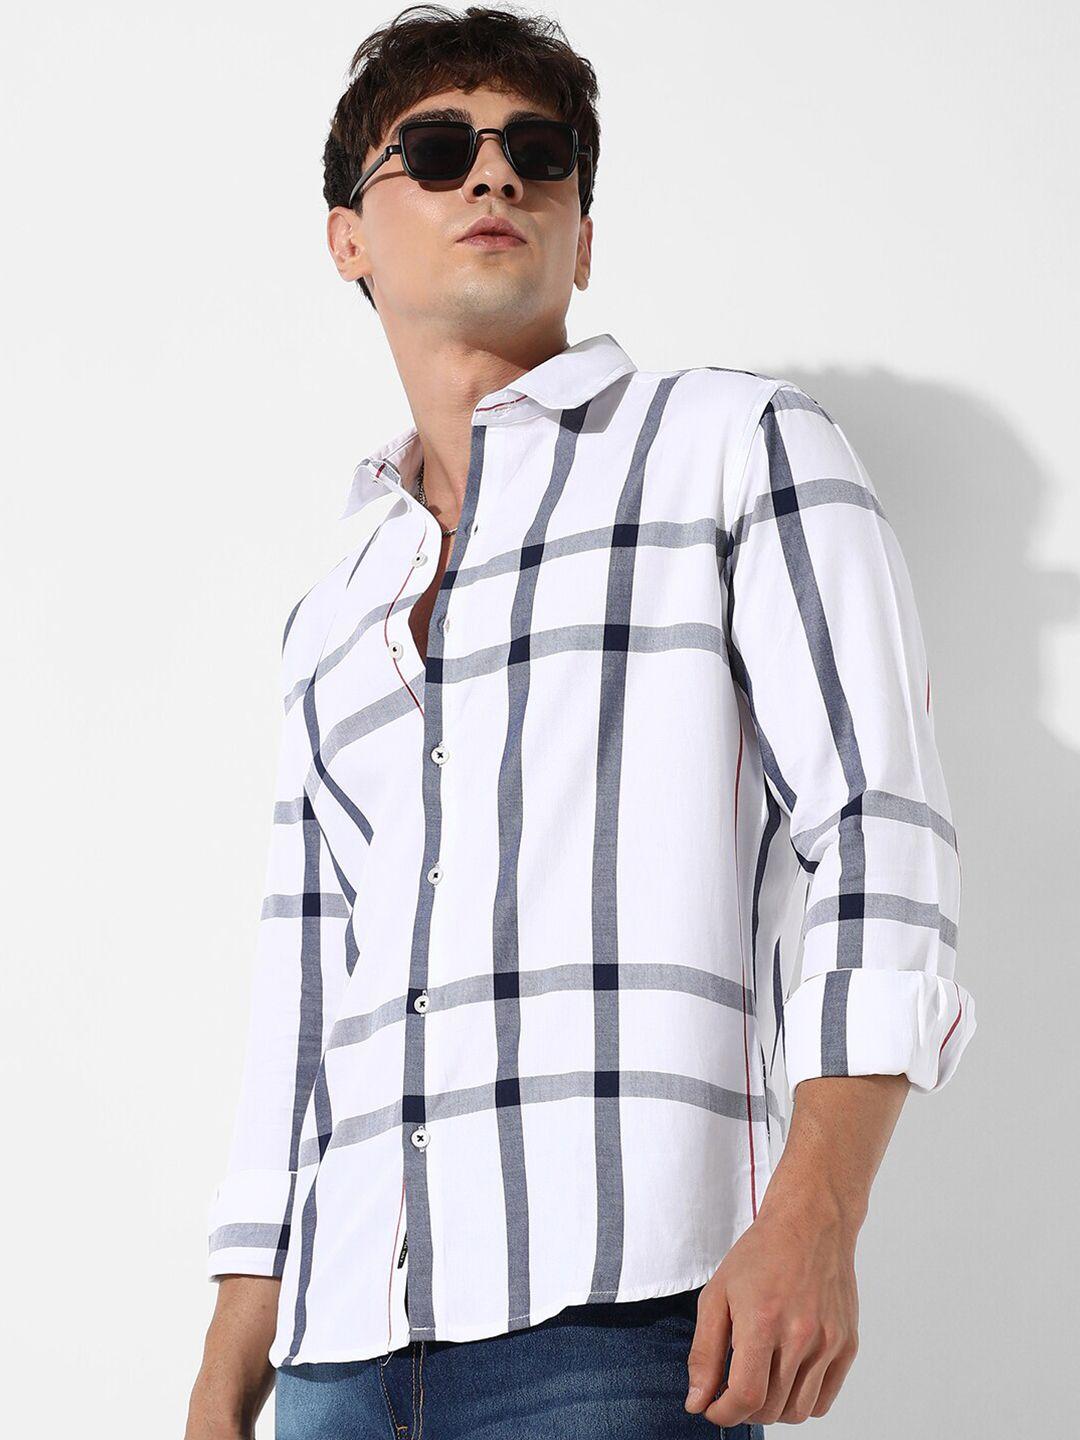 Campus Sutra Classic Striped Cotton Casual Shirt